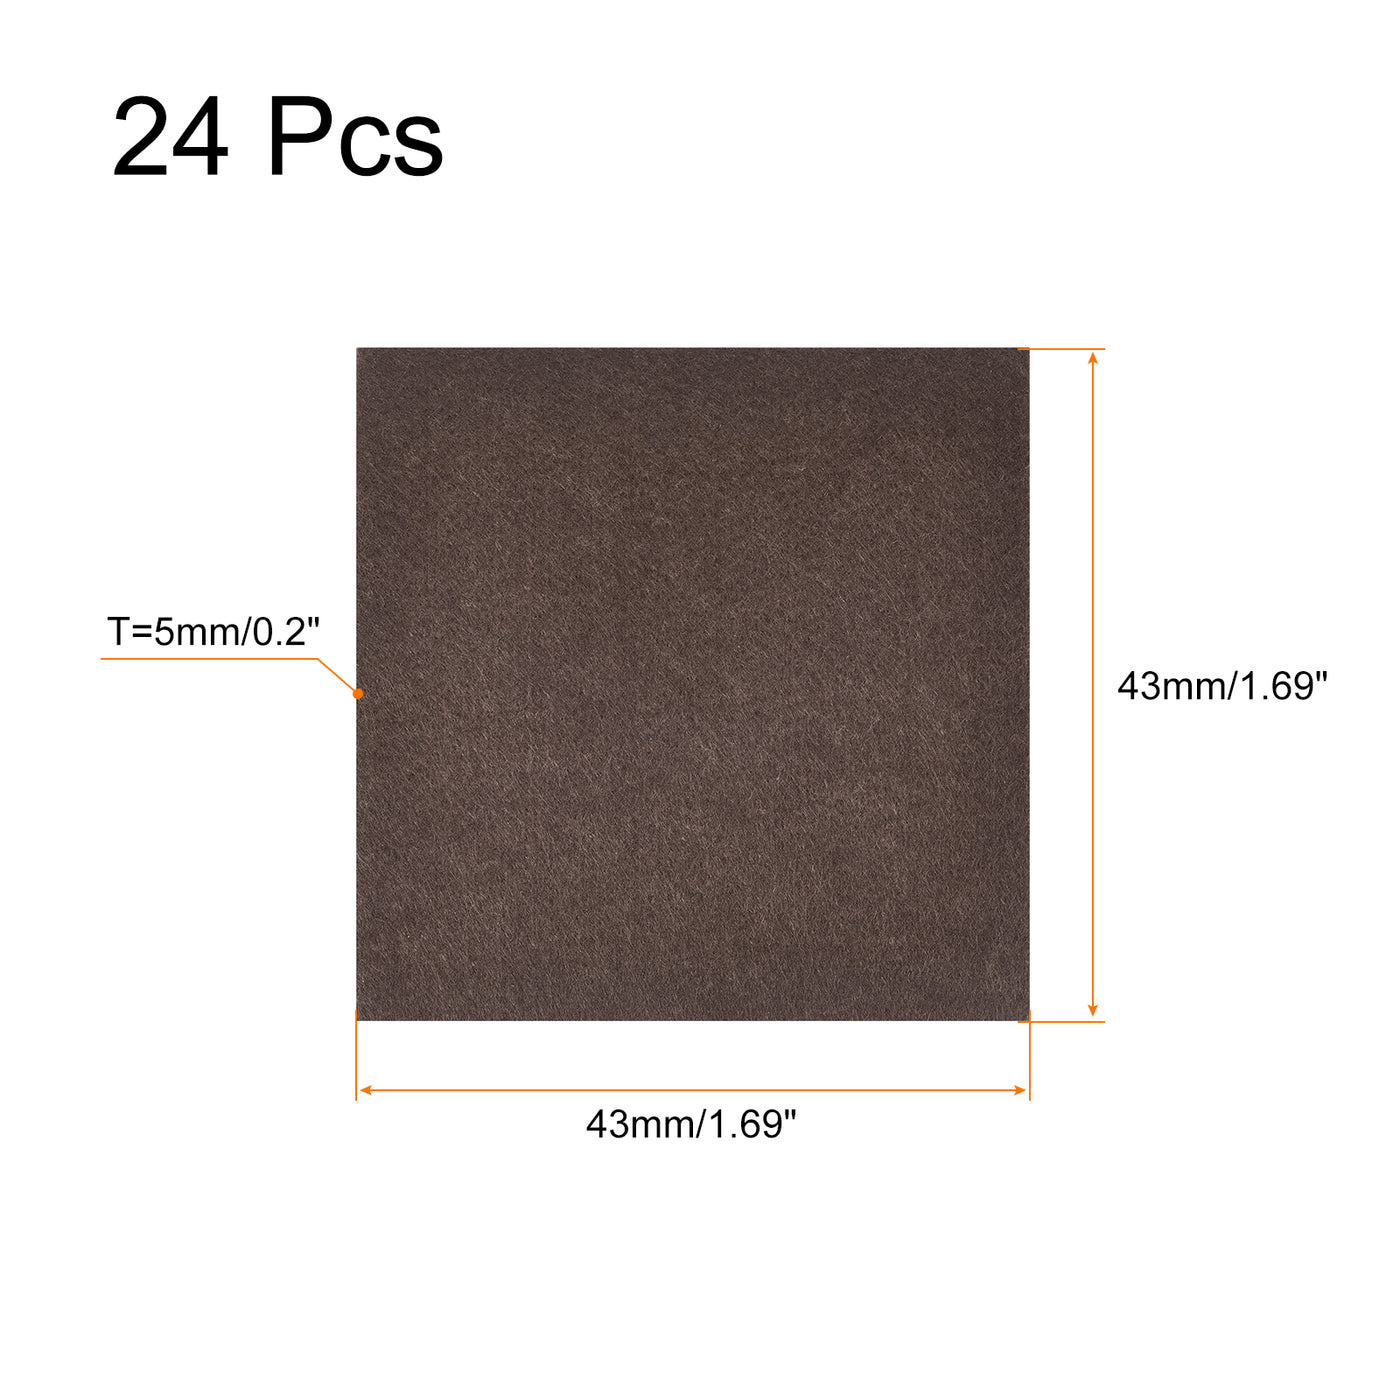 uxcell Uxcell Felt Furniture Pads, 43mm x 43mm Self Adhesive Square Floor Protectors for Furniture Legs Hardwood Floor, Brown 24Pcs